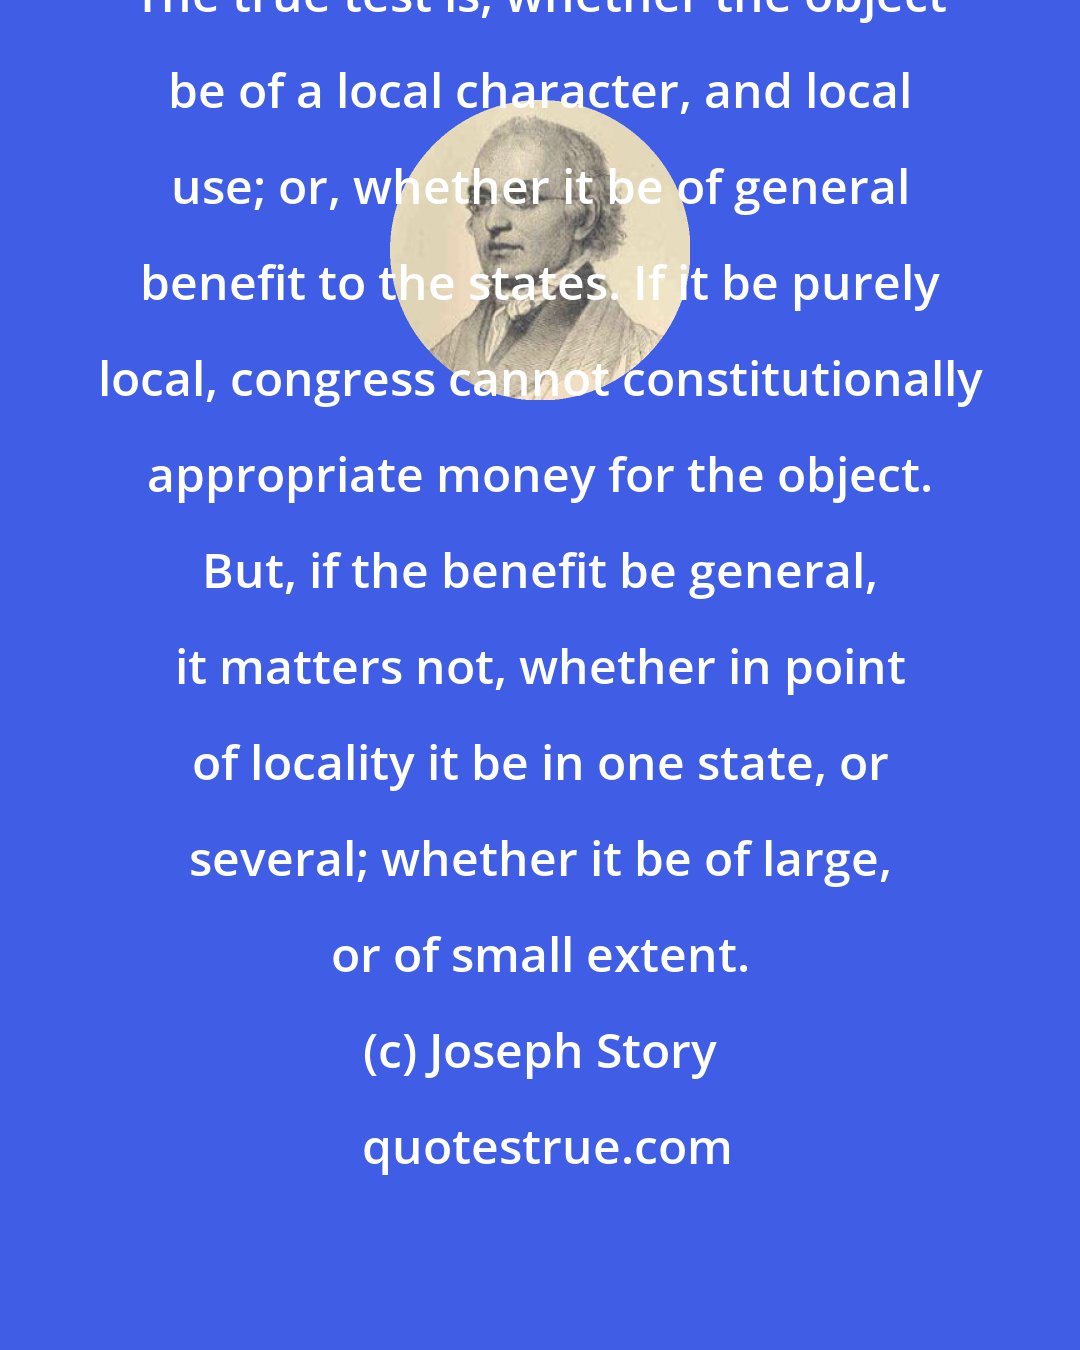 Joseph Story: The true test is, whether the object be of a local character, and local use; or, whether it be of general benefit to the states. If it be purely local, congress cannot constitutionally appropriate money for the object. But, if the benefit be general, it matters not, whether in point of locality it be in one state, or several; whether it be of large, or of small extent.